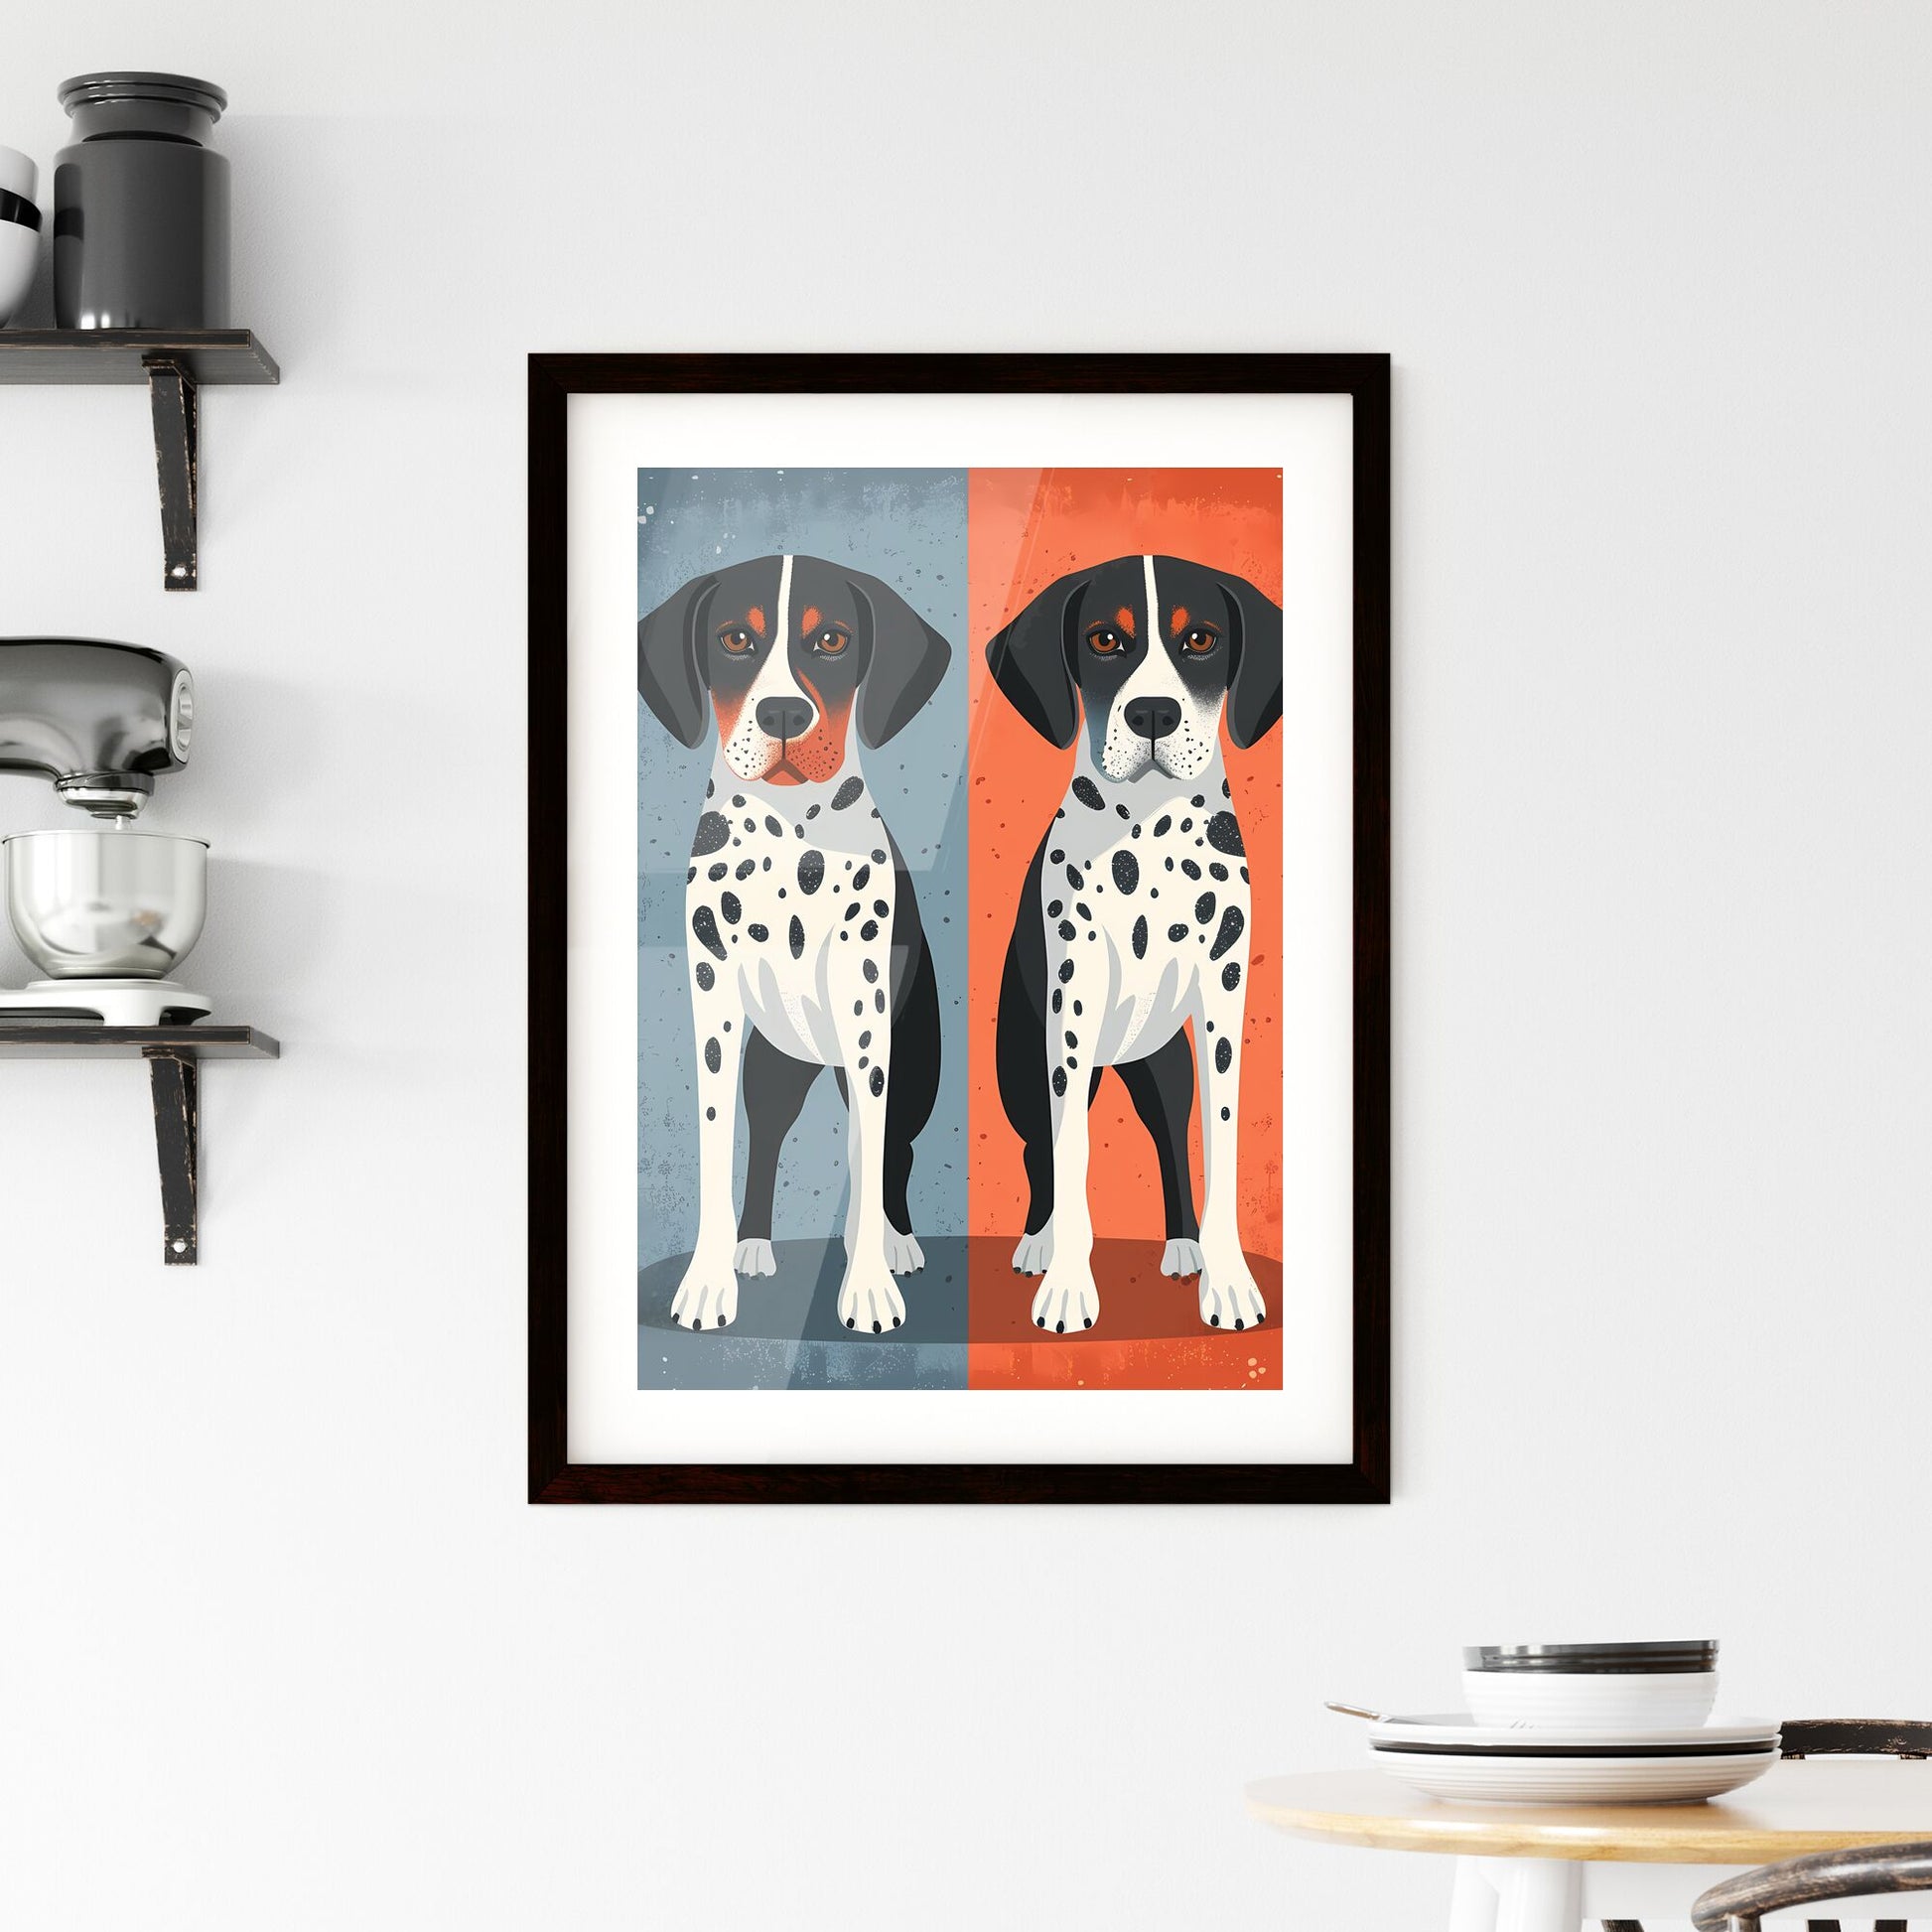 A Poster of two dogs holding each other - A Dog With Black And White Spots Default Title